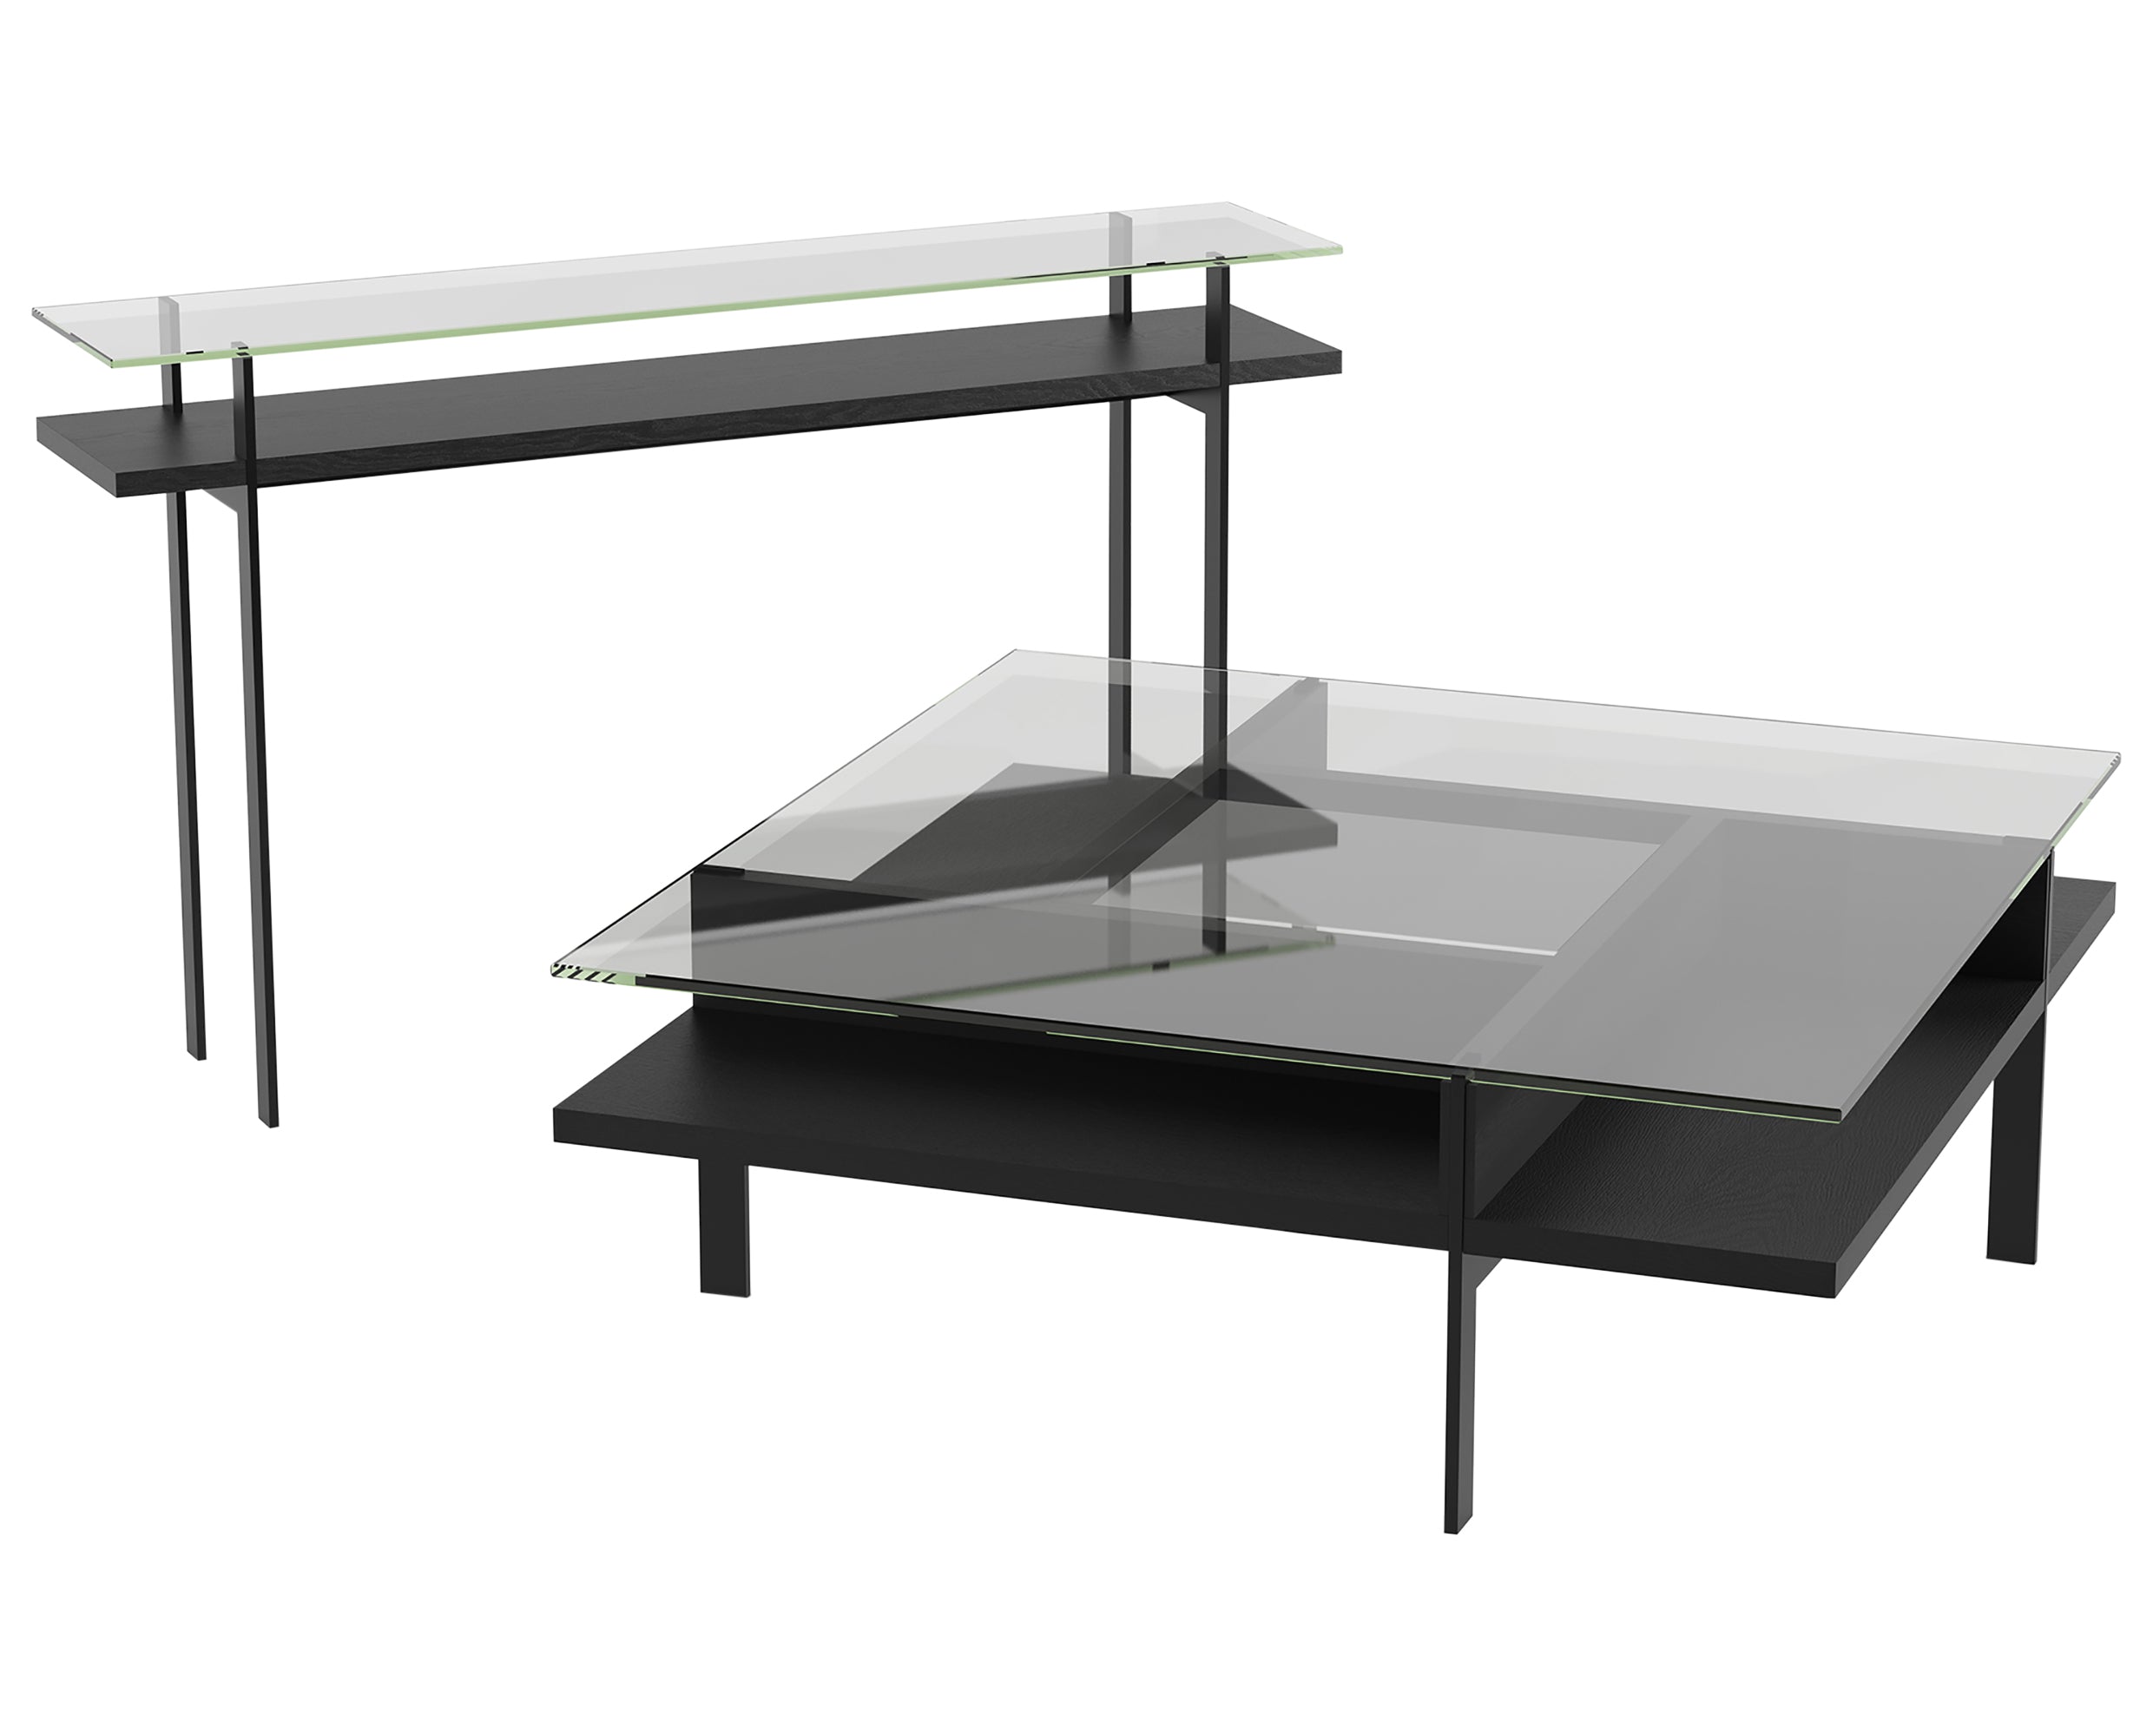 Charcoal Ash Veneer & Polished Tempered Glass with Black Aluminum | BDI Terrace Rectangular Coffee Table | Valley Ridge Furniture